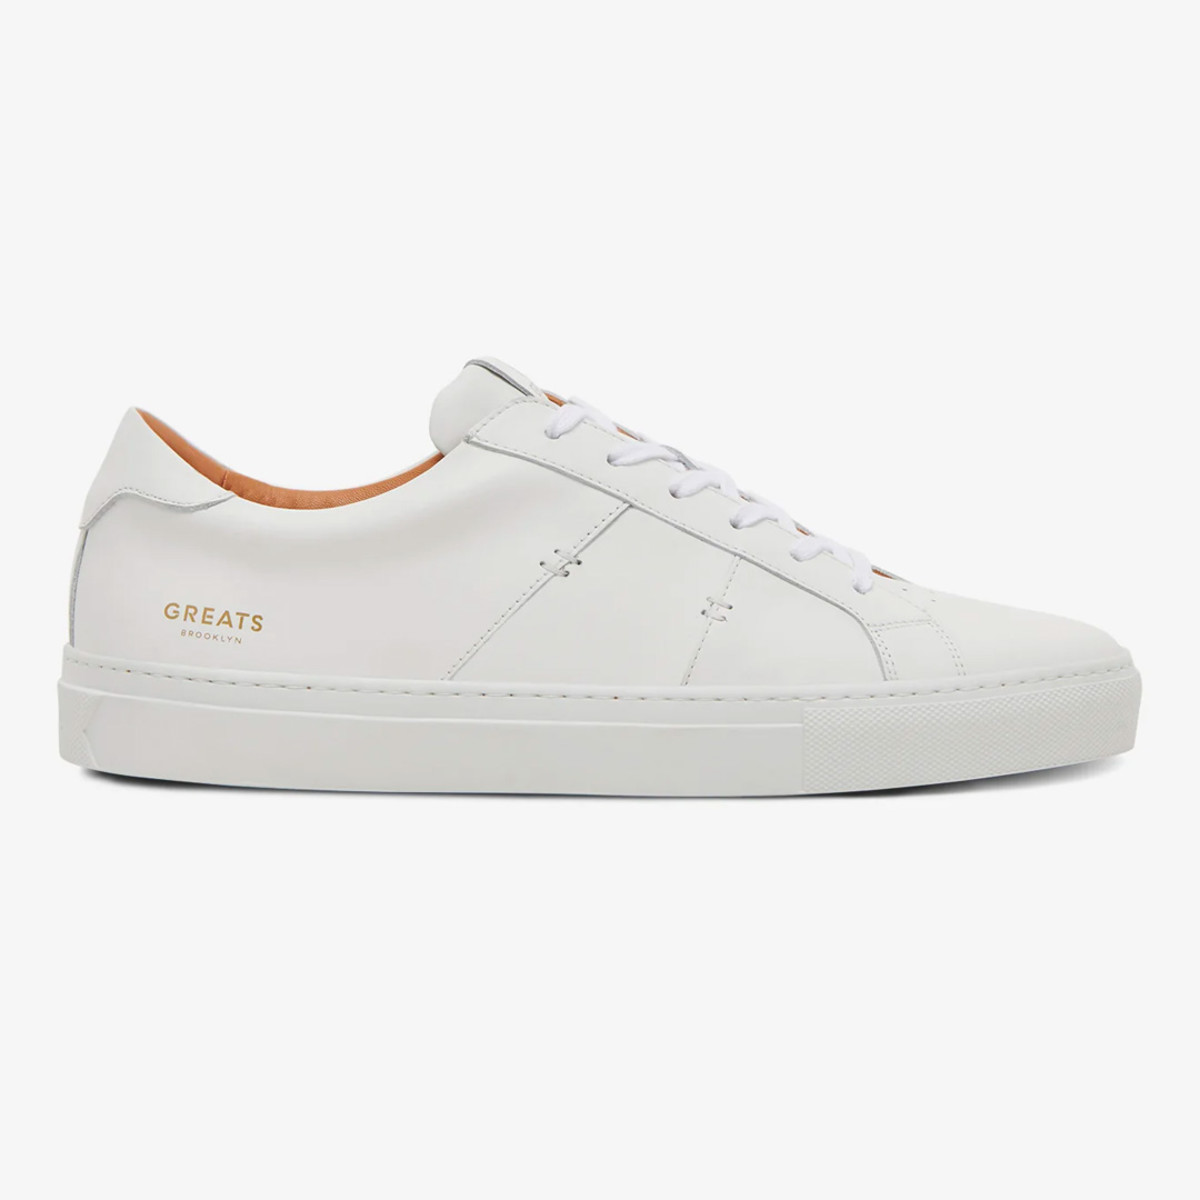 Greats Brooklyn The Royale Men's Shoes, 8.5M US/Cuoio | eBay